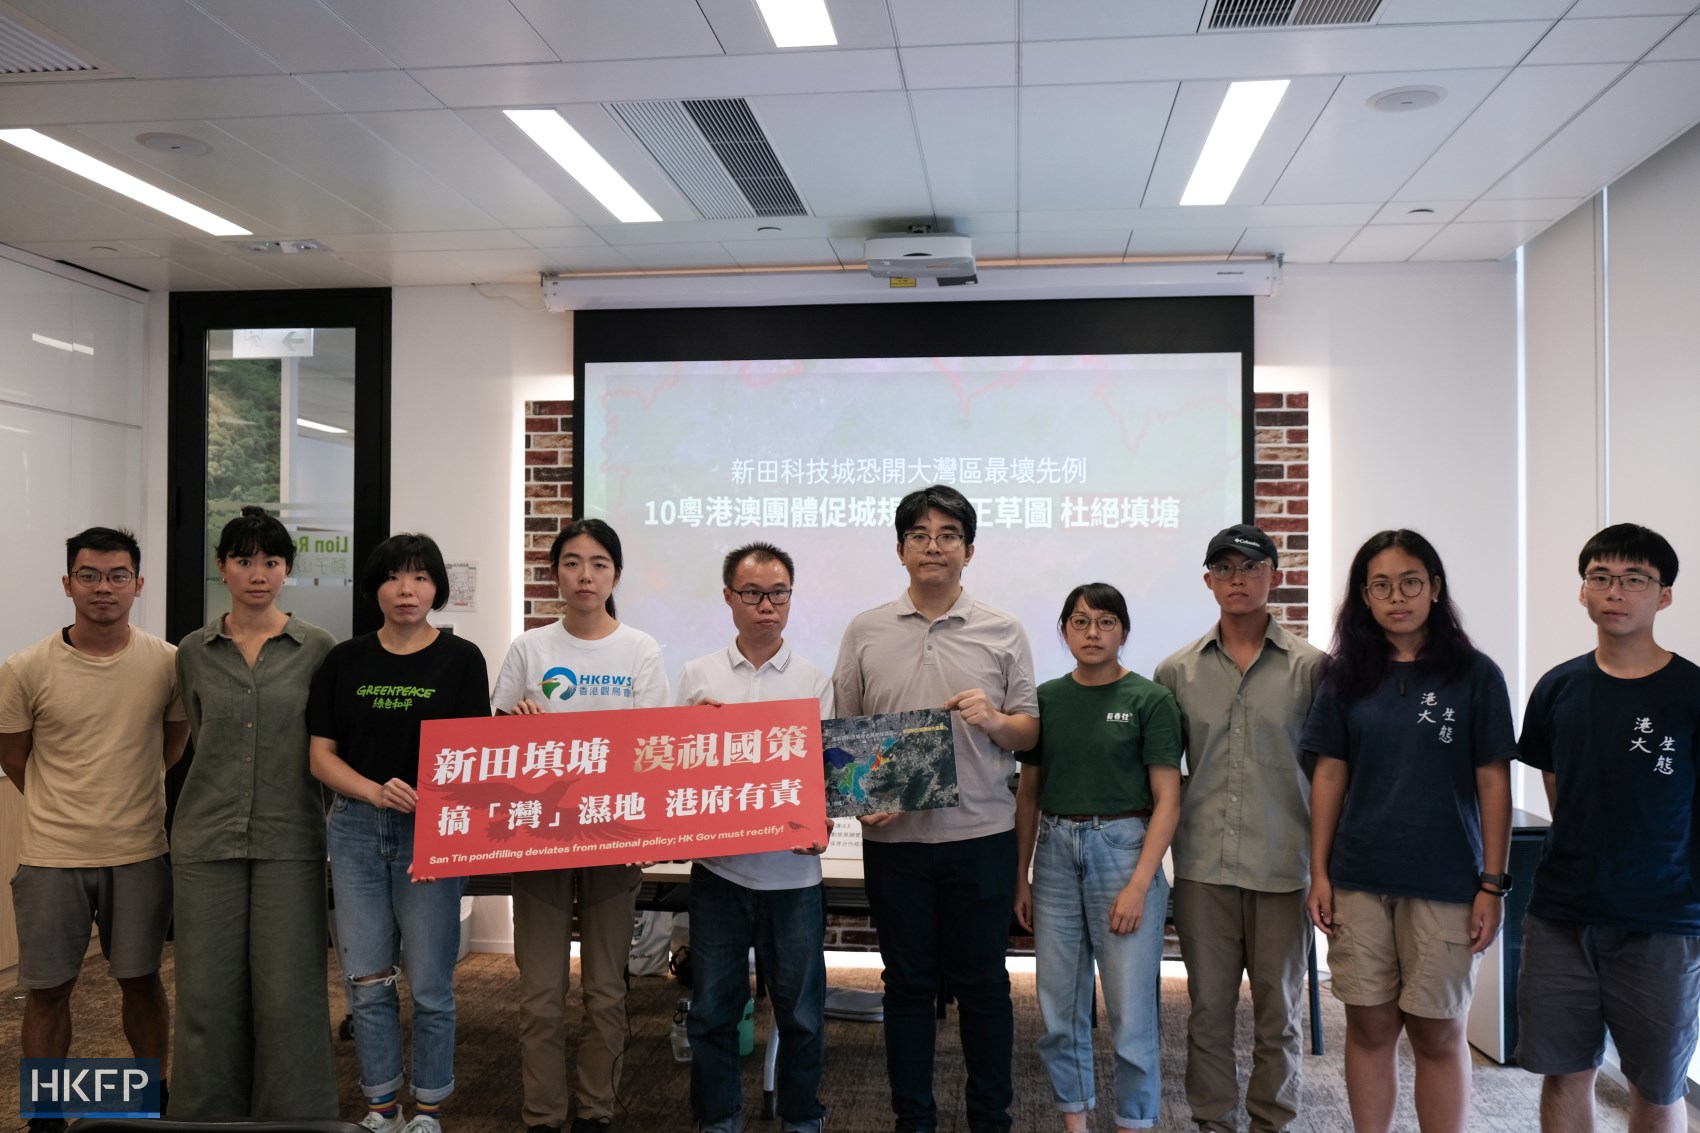 Environmental groups from Hong Kong, Guangdong and Macau file a joint petition letter to the Development Bureau, Town Planning Board (and Planning Department on Tuesday to call for a revision of a development plan for the city’s proposed San Tin Technopole plan. Photo: Kelly Ho/HKFP.